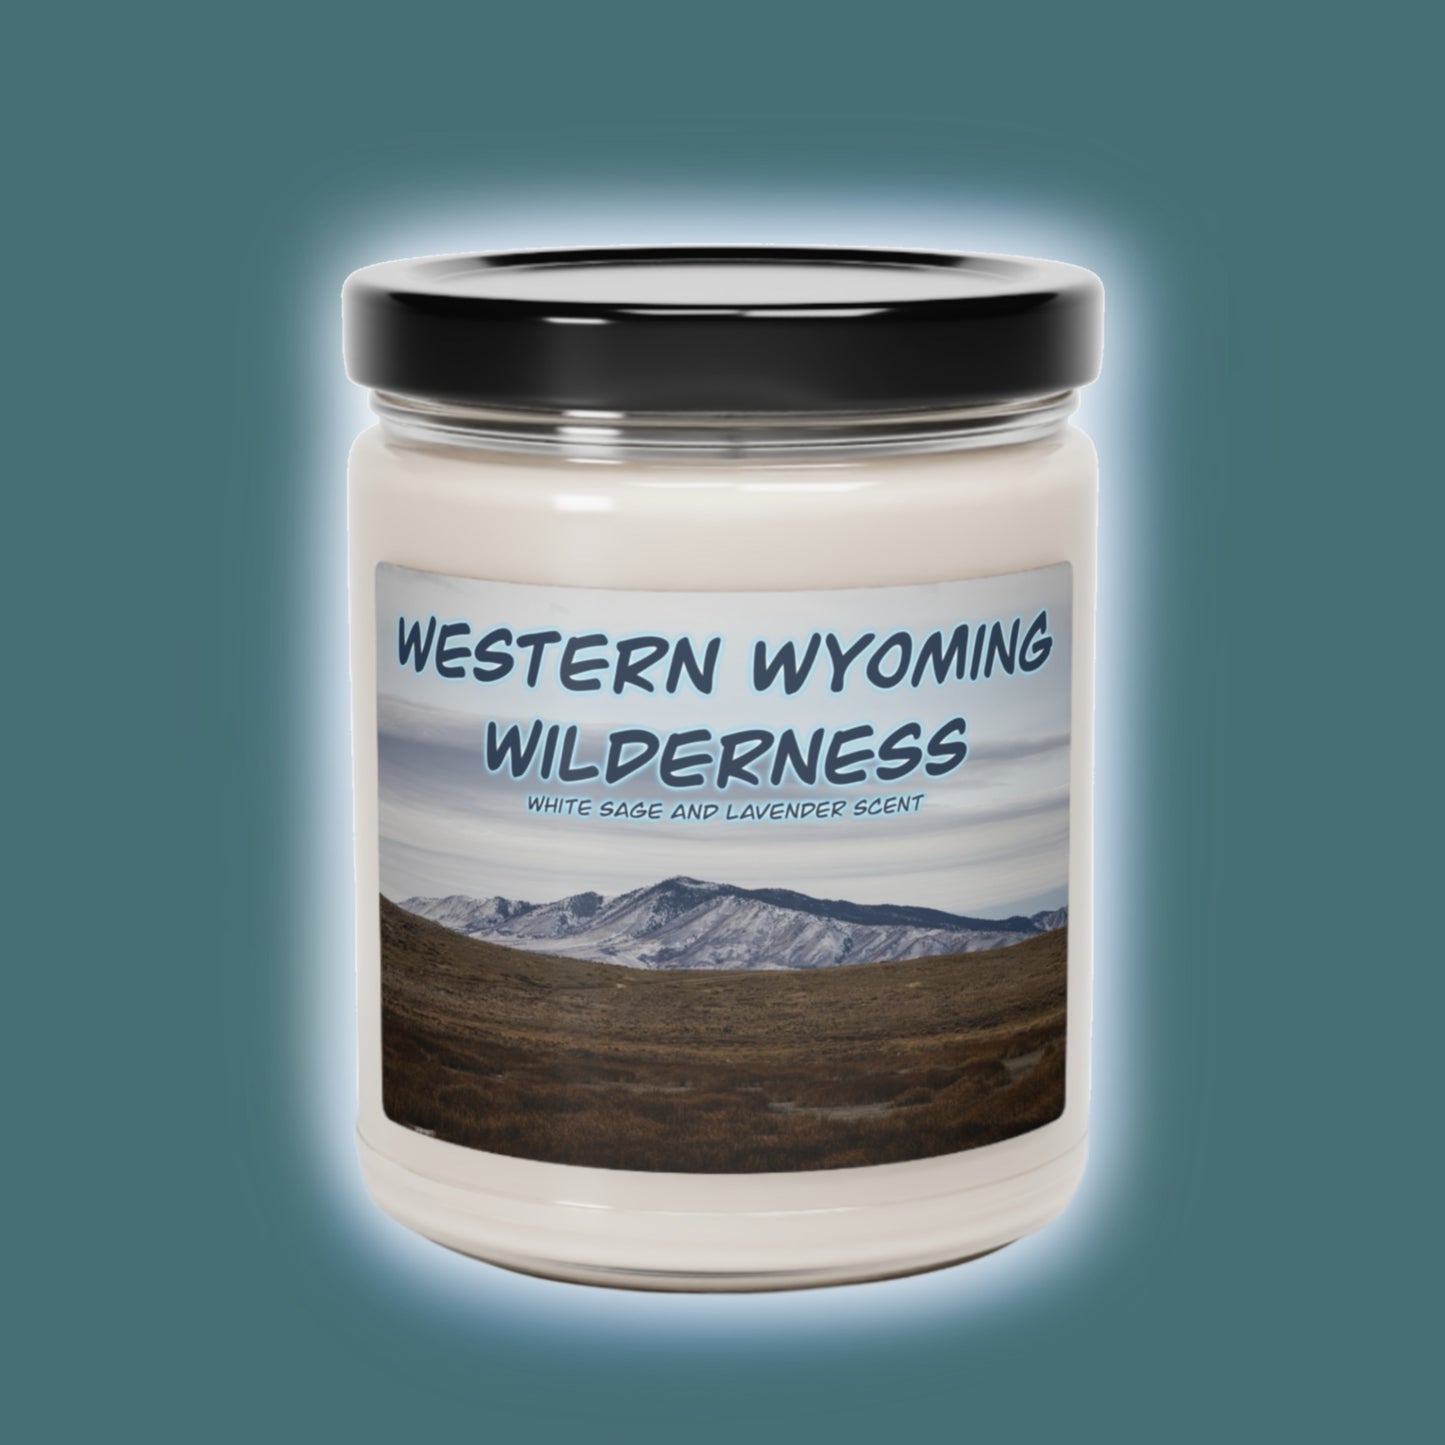 Western Wyoming Wilderness Candle